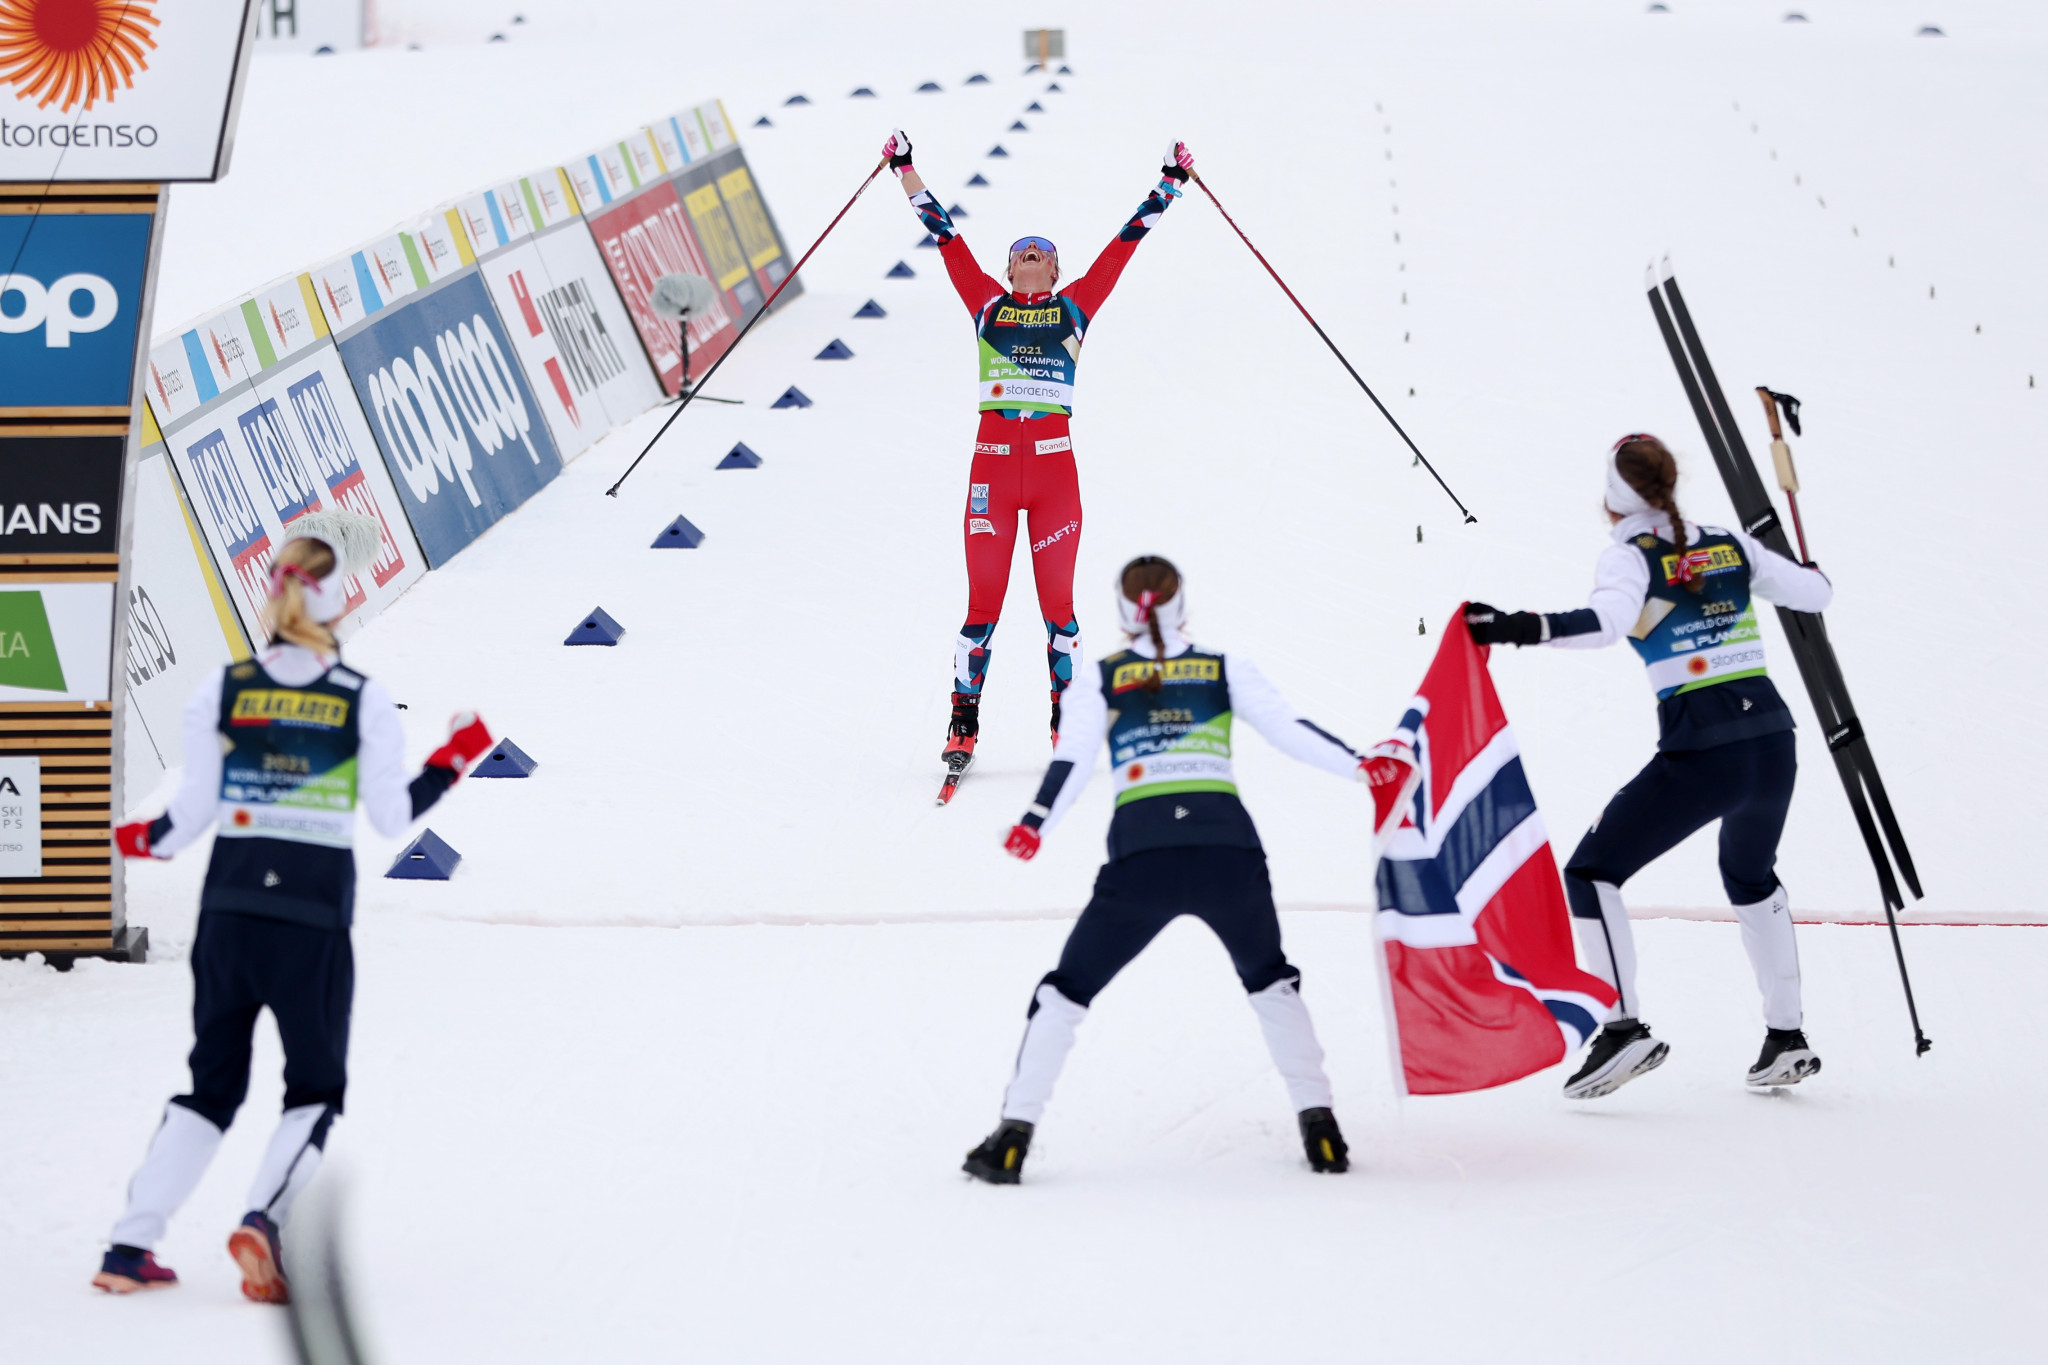 Anne Kjersti Kalvå crosses the finish line as her team-mates join her to celebrate their victory ©Getty Images